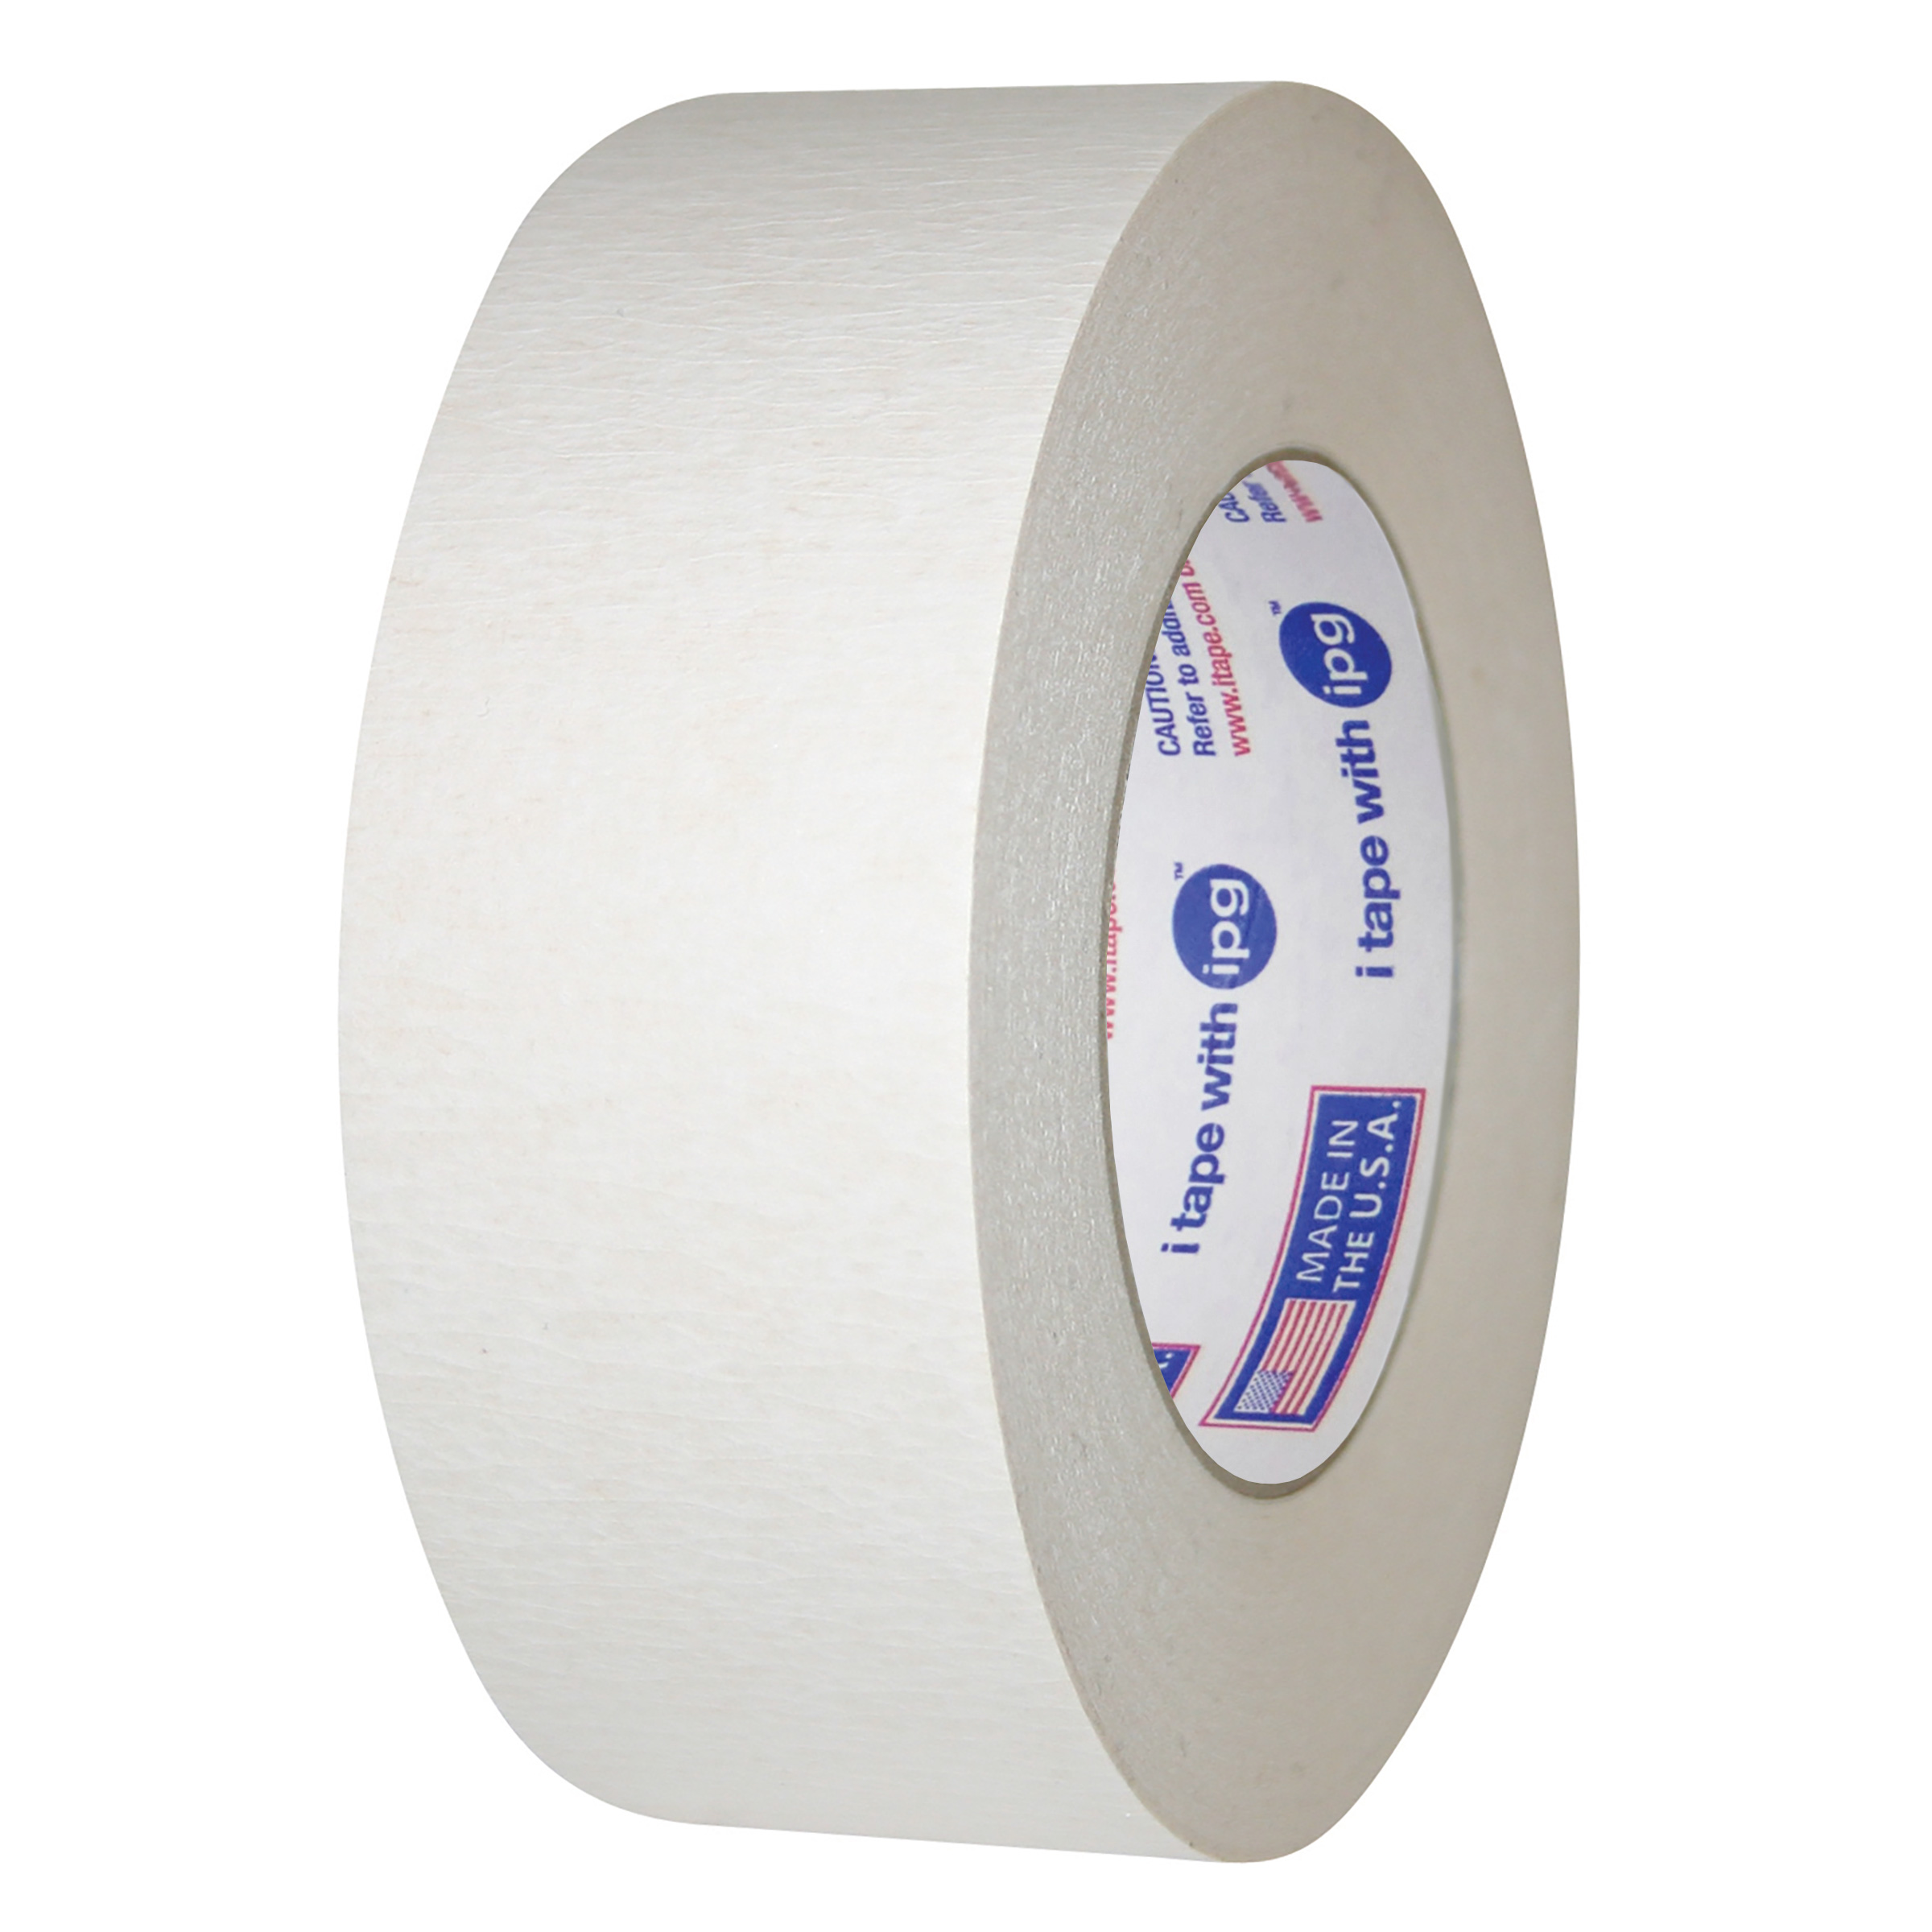 Double Sided Tape  Adhesive Tape & Labels for Critical